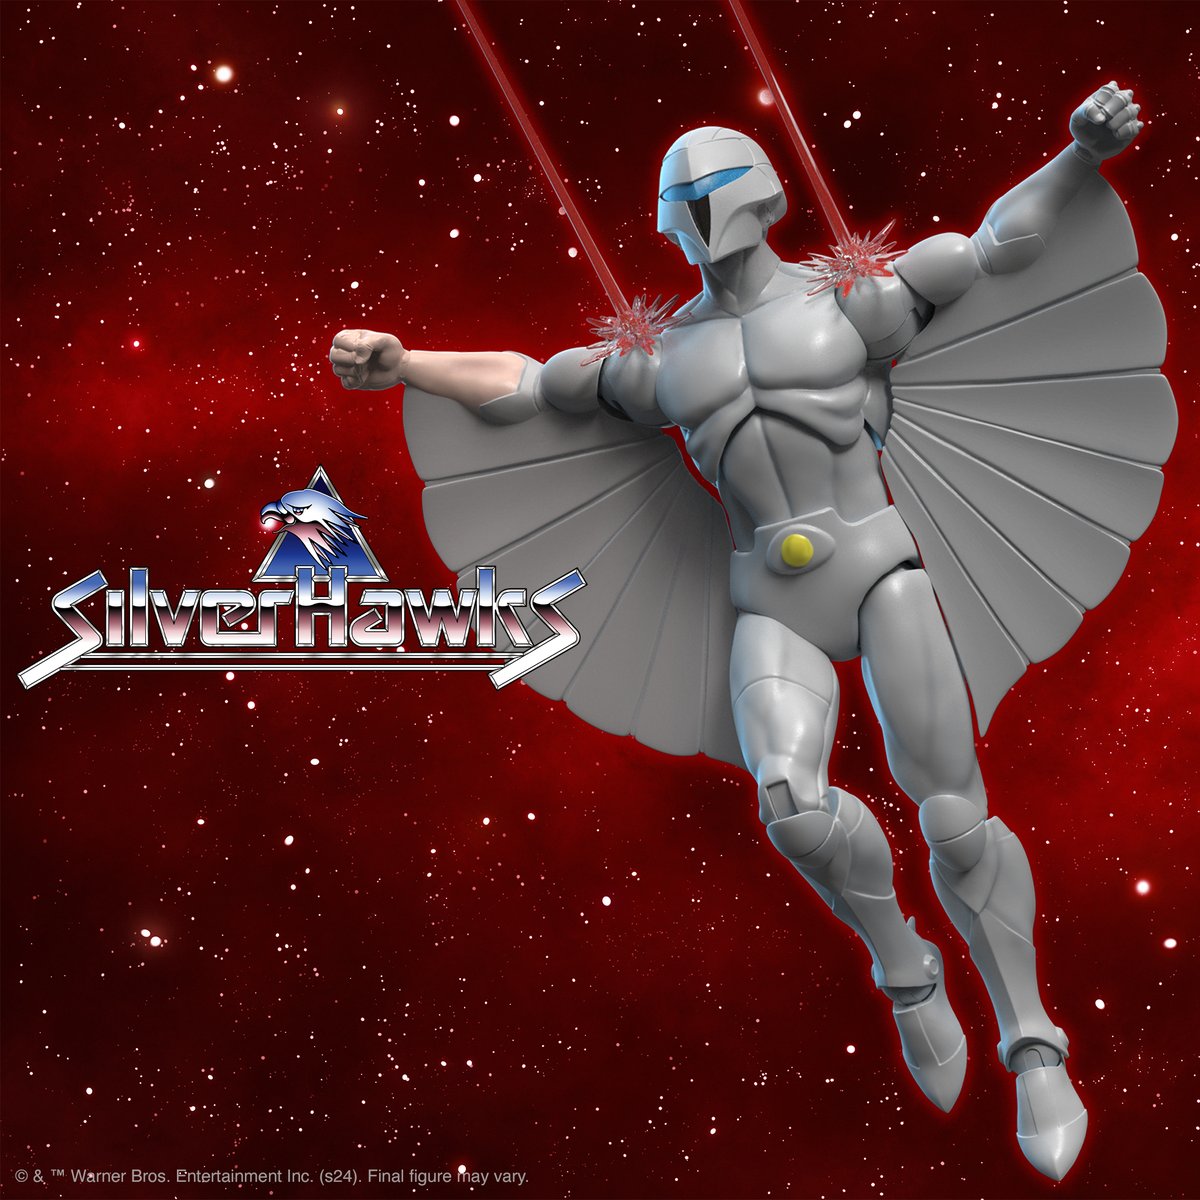 SilverHawks ULTIMATES! Darkbird BBTS Exclusive available for pre-order!

bit.ly/3xS8ItJ
#silverhawksultimates #darkbird #bigbadtoystore #bbts